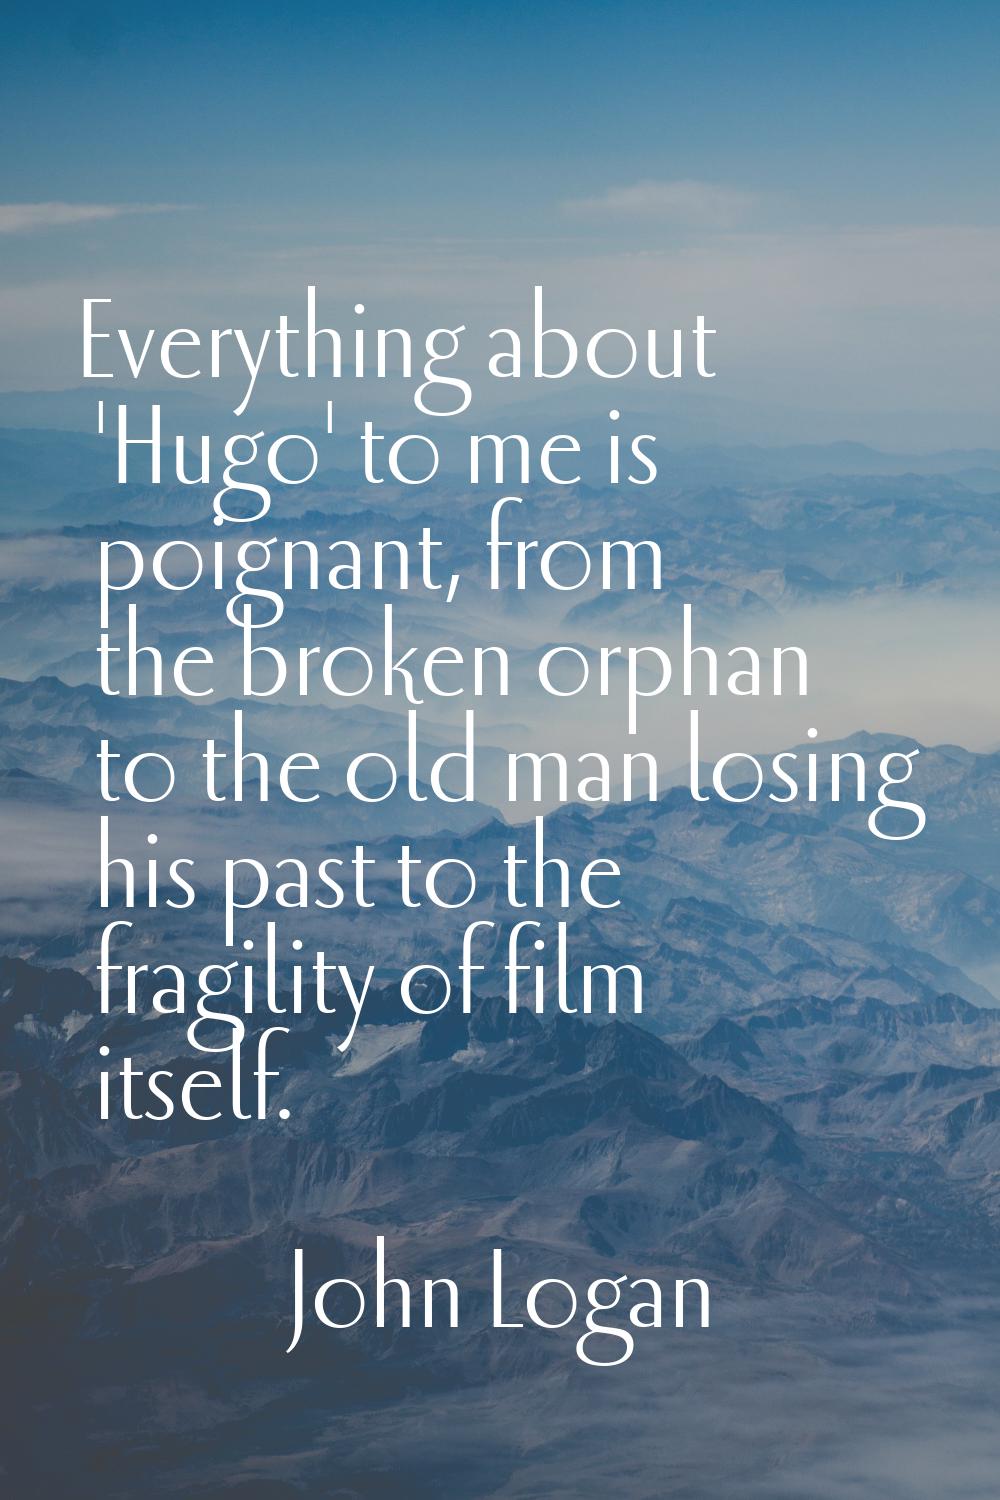 Everything about 'Hugo' to me is poignant, from the broken orphan to the old man losing his past to